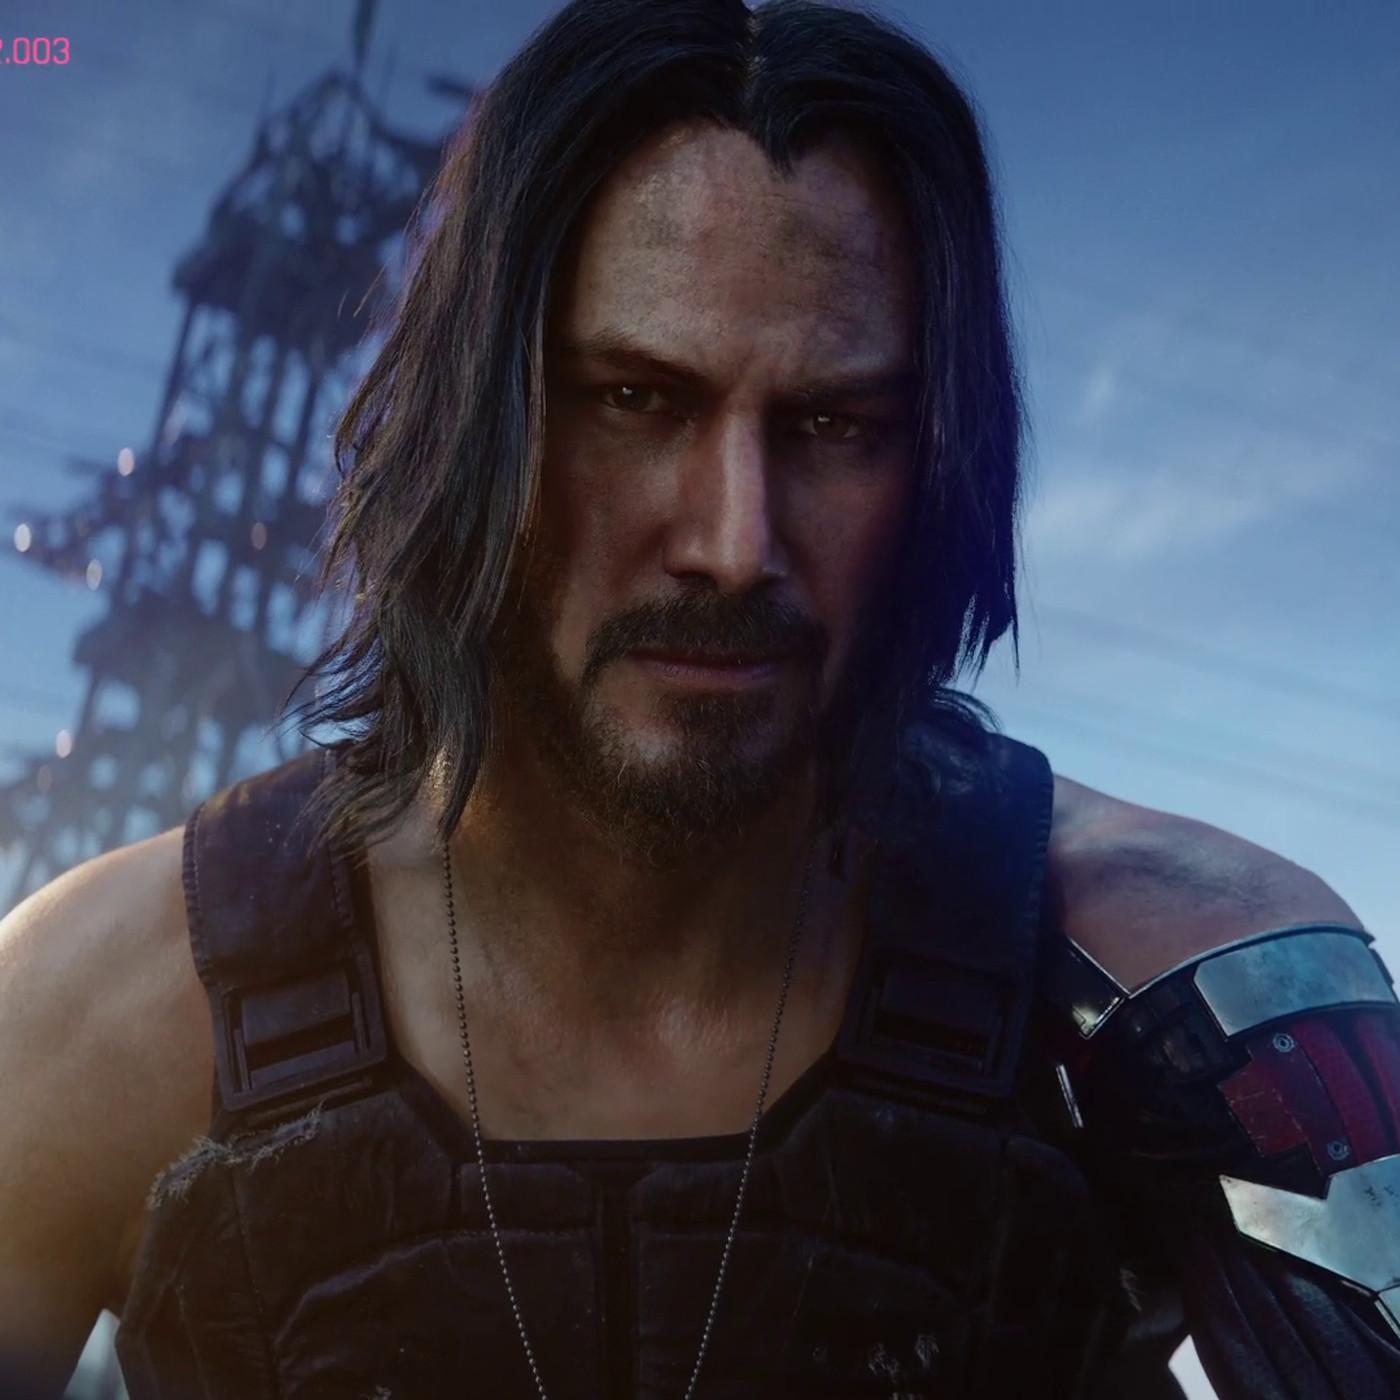 Who is Keanu Reeves playing in Cyberpunk 2077?